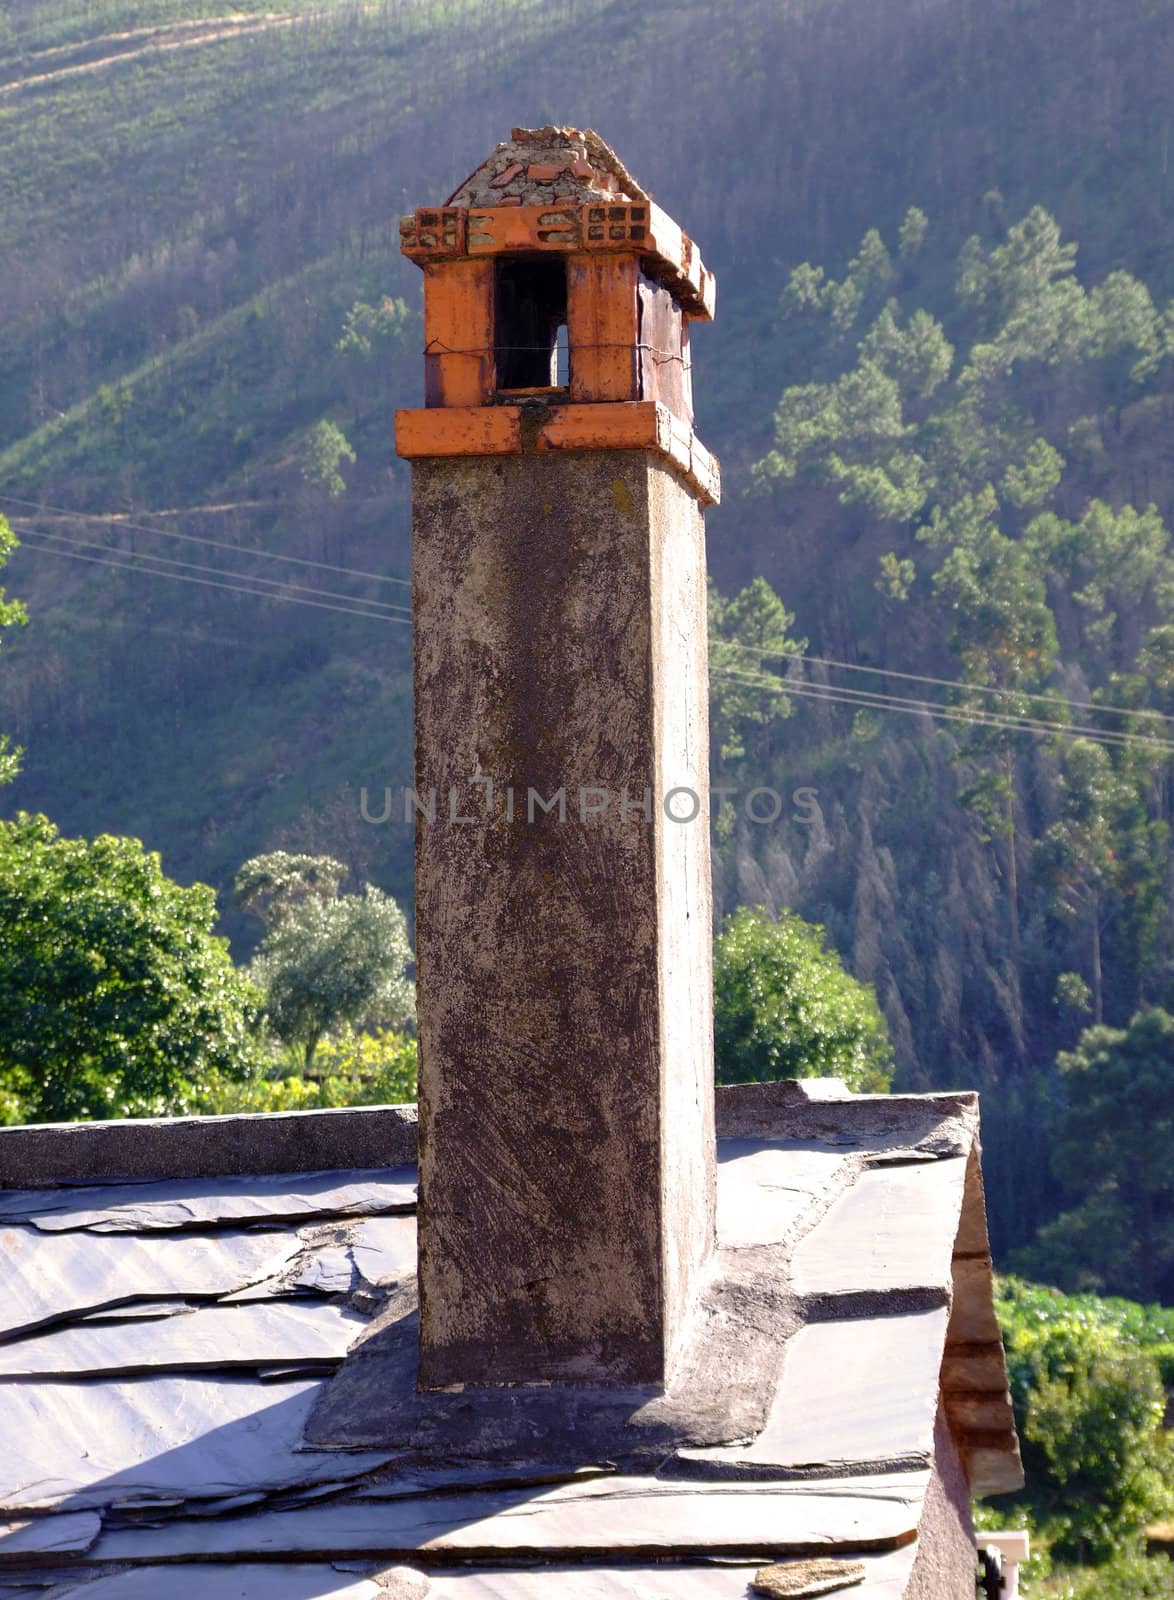 Old rustic chimney on top of srone roof